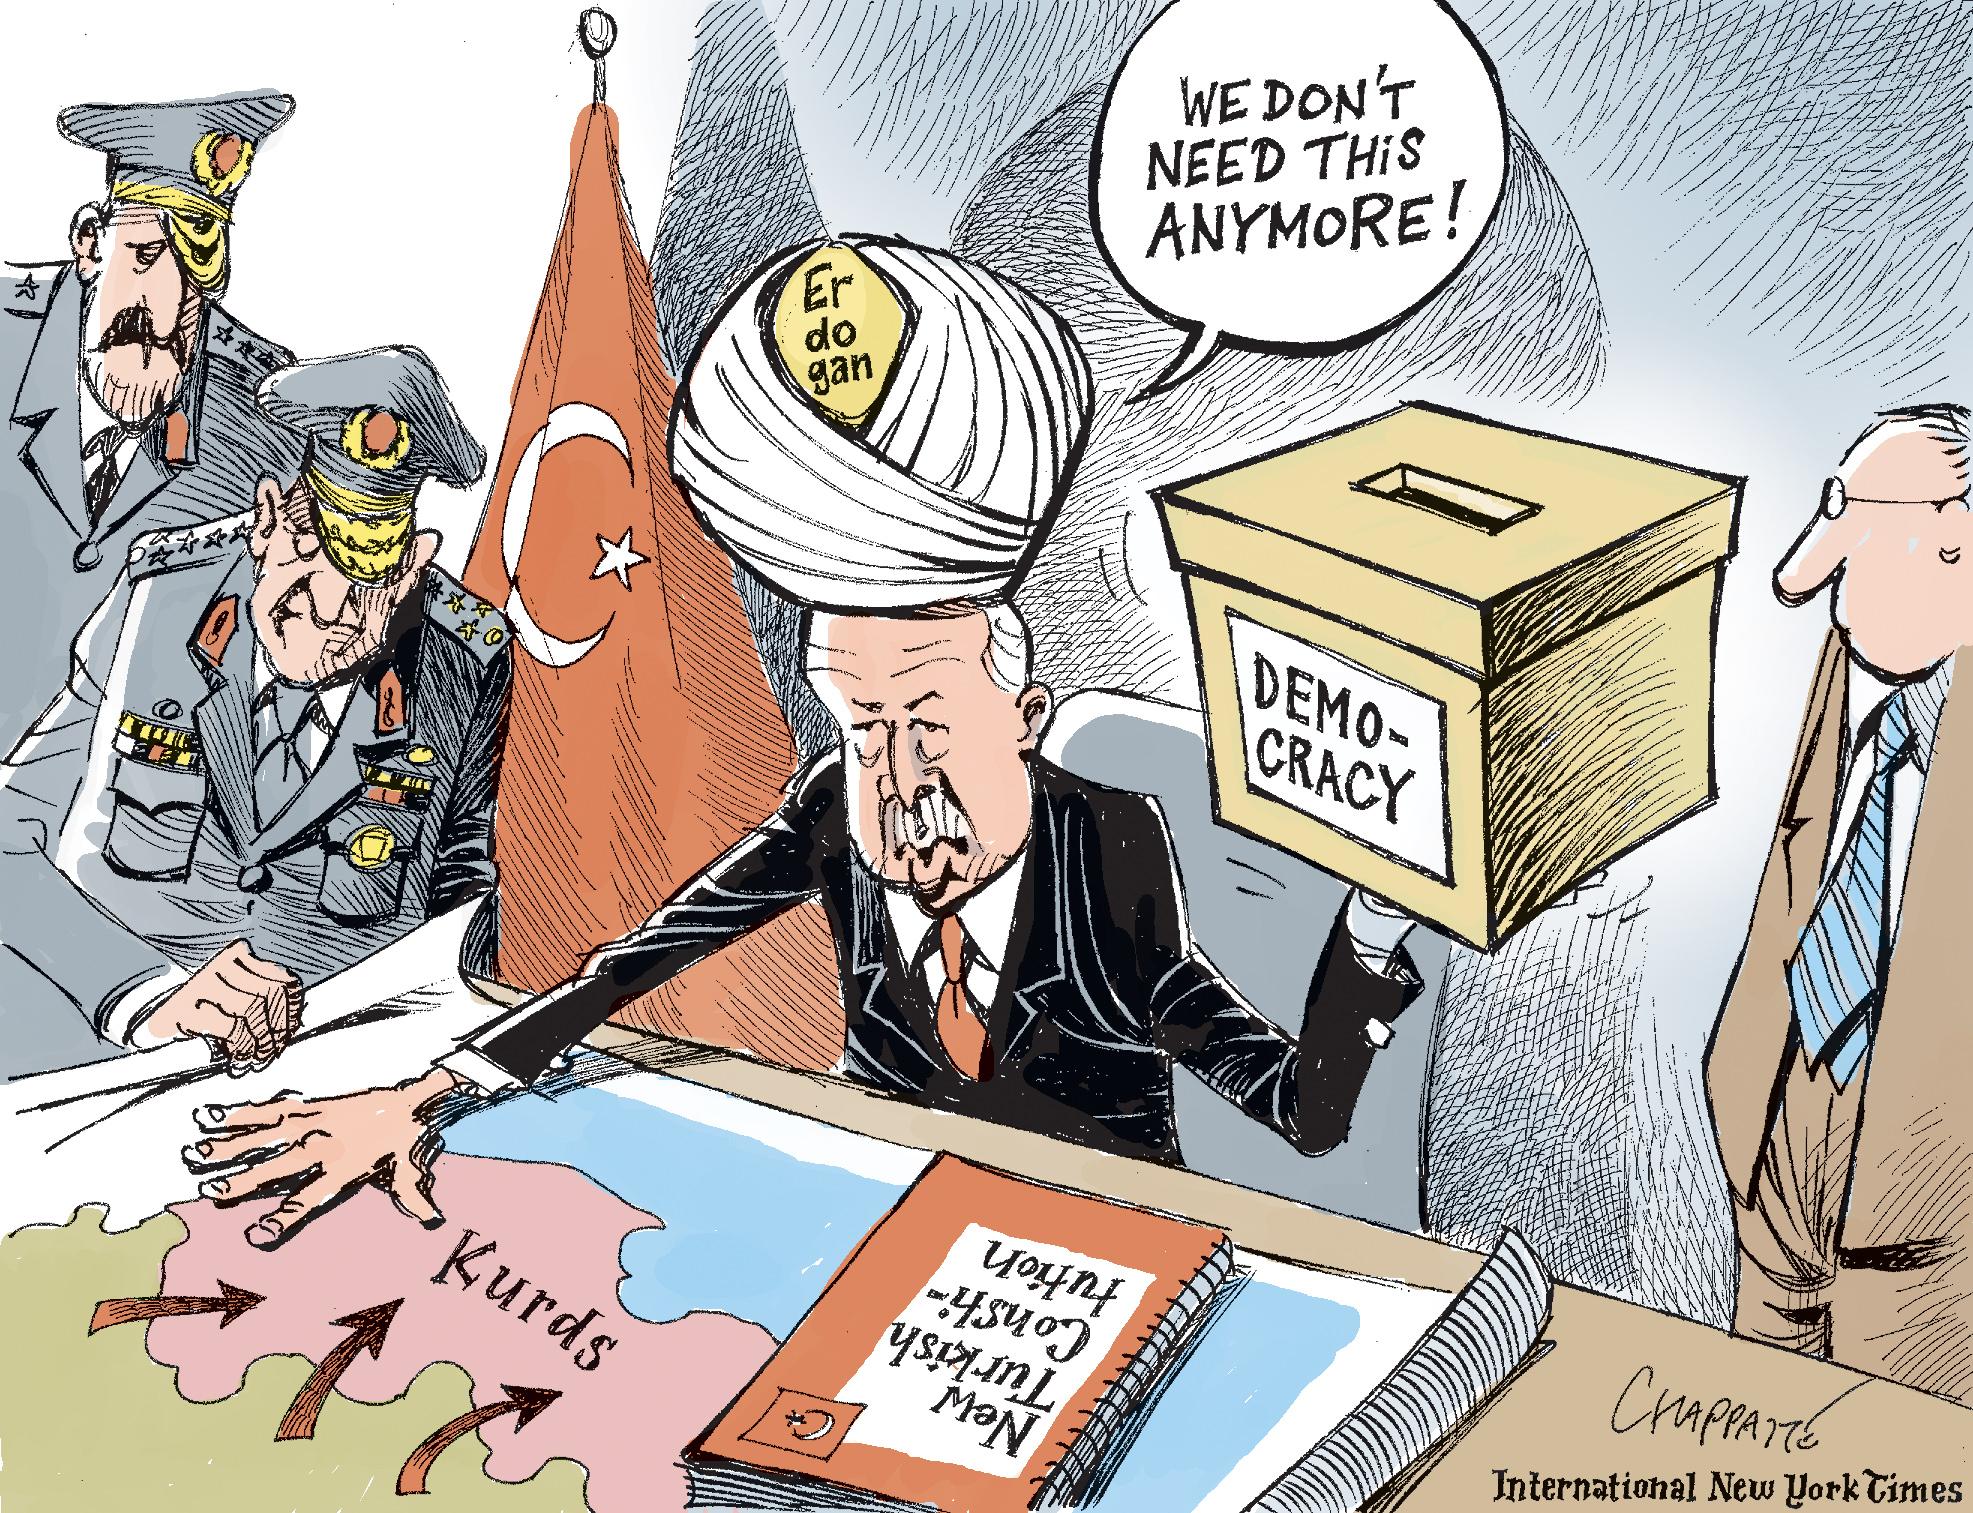 After the Turkish elections